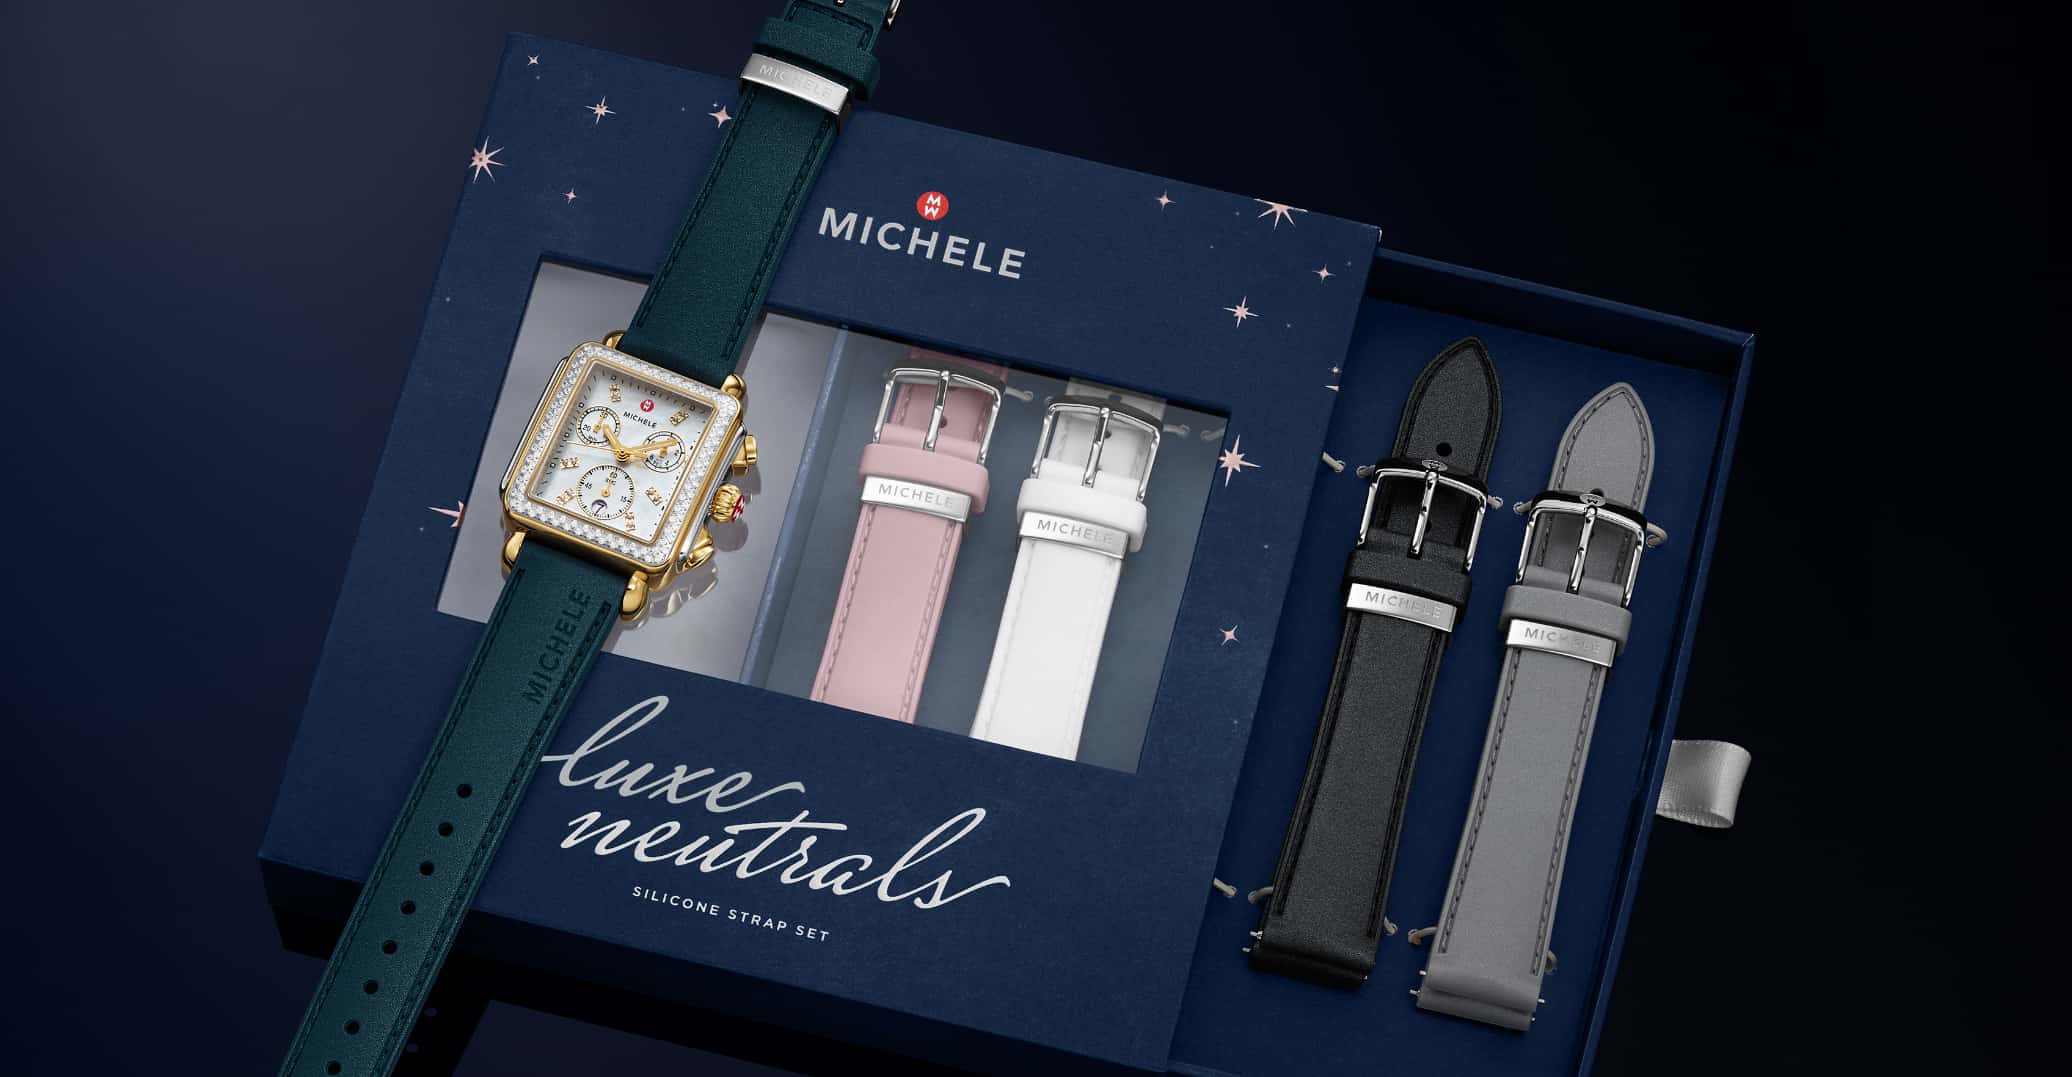 Strap sets for MICHELE watches